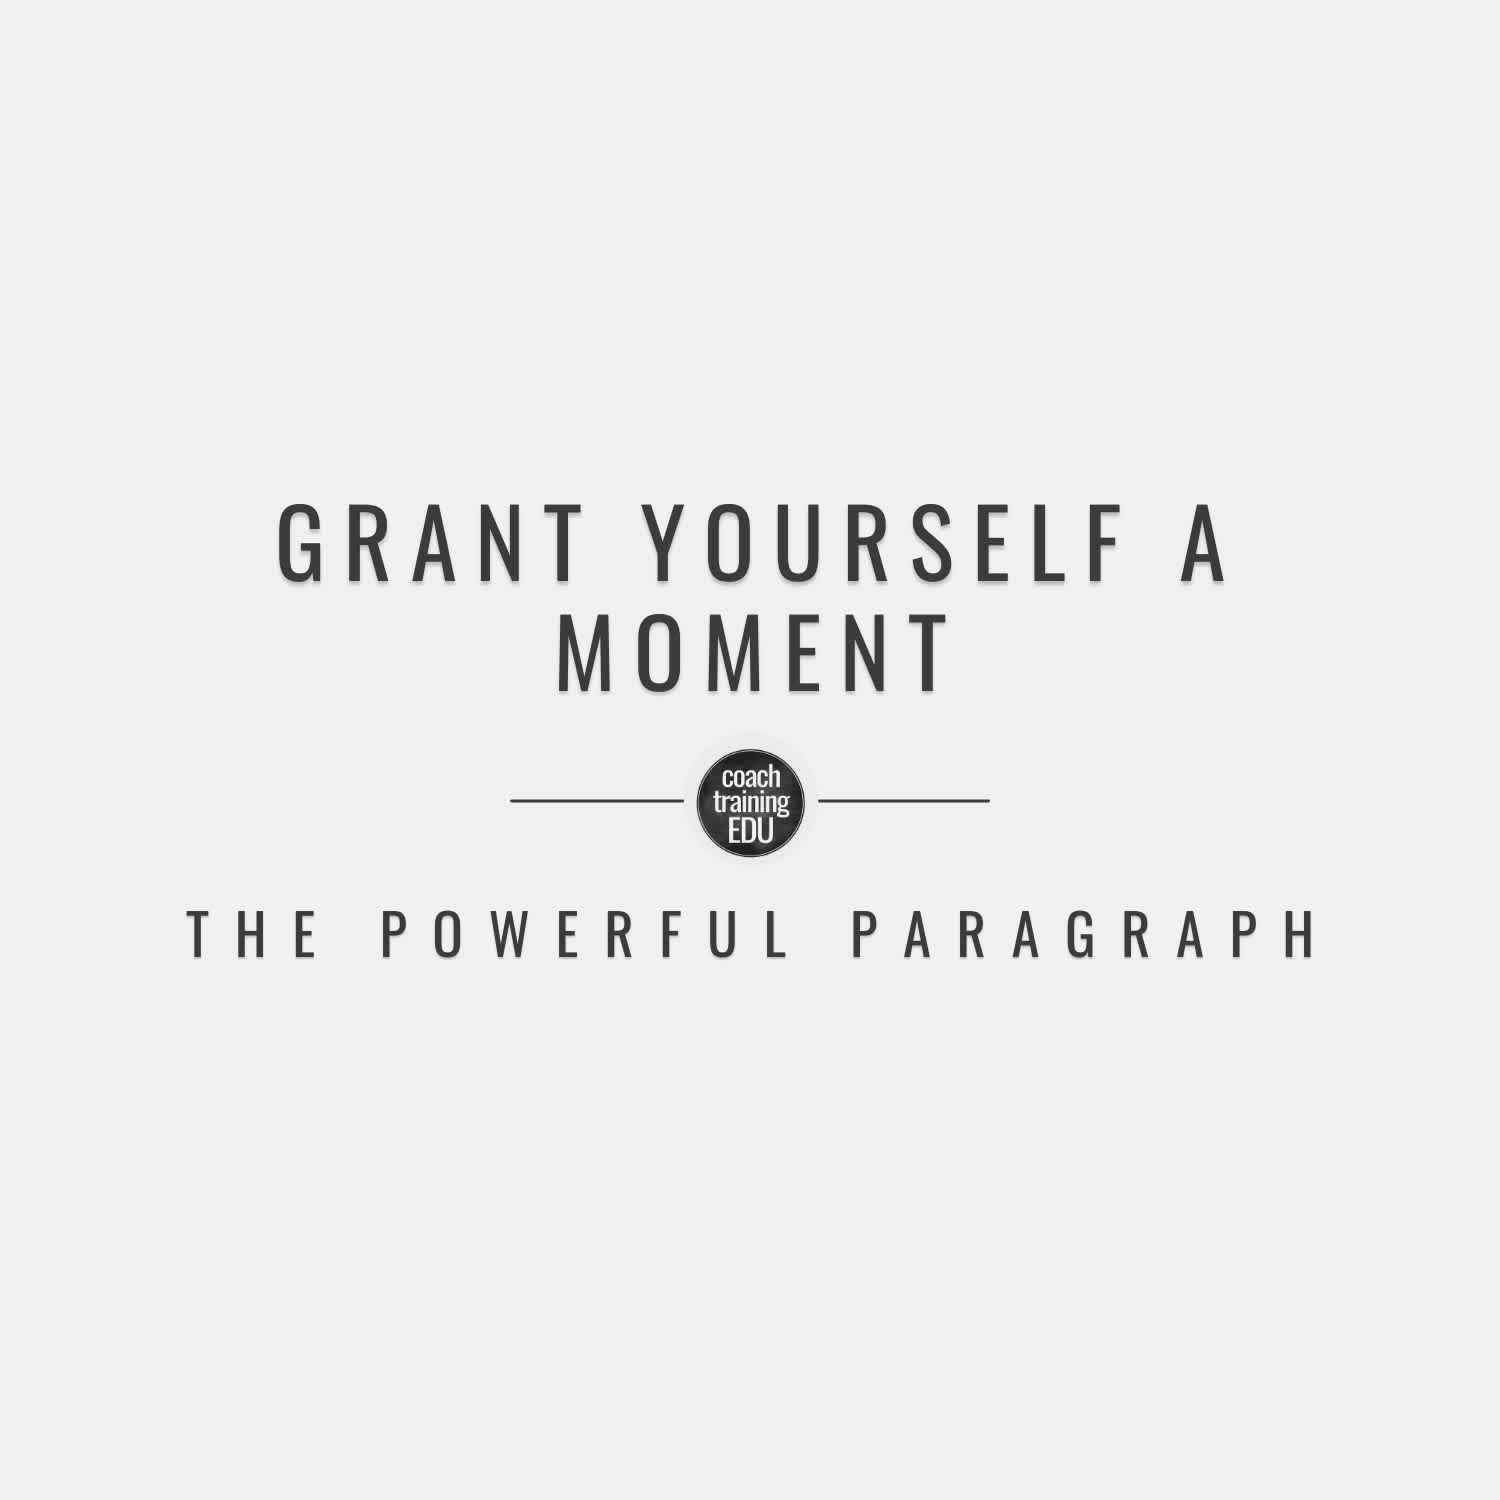 Grant Yourself a Moment